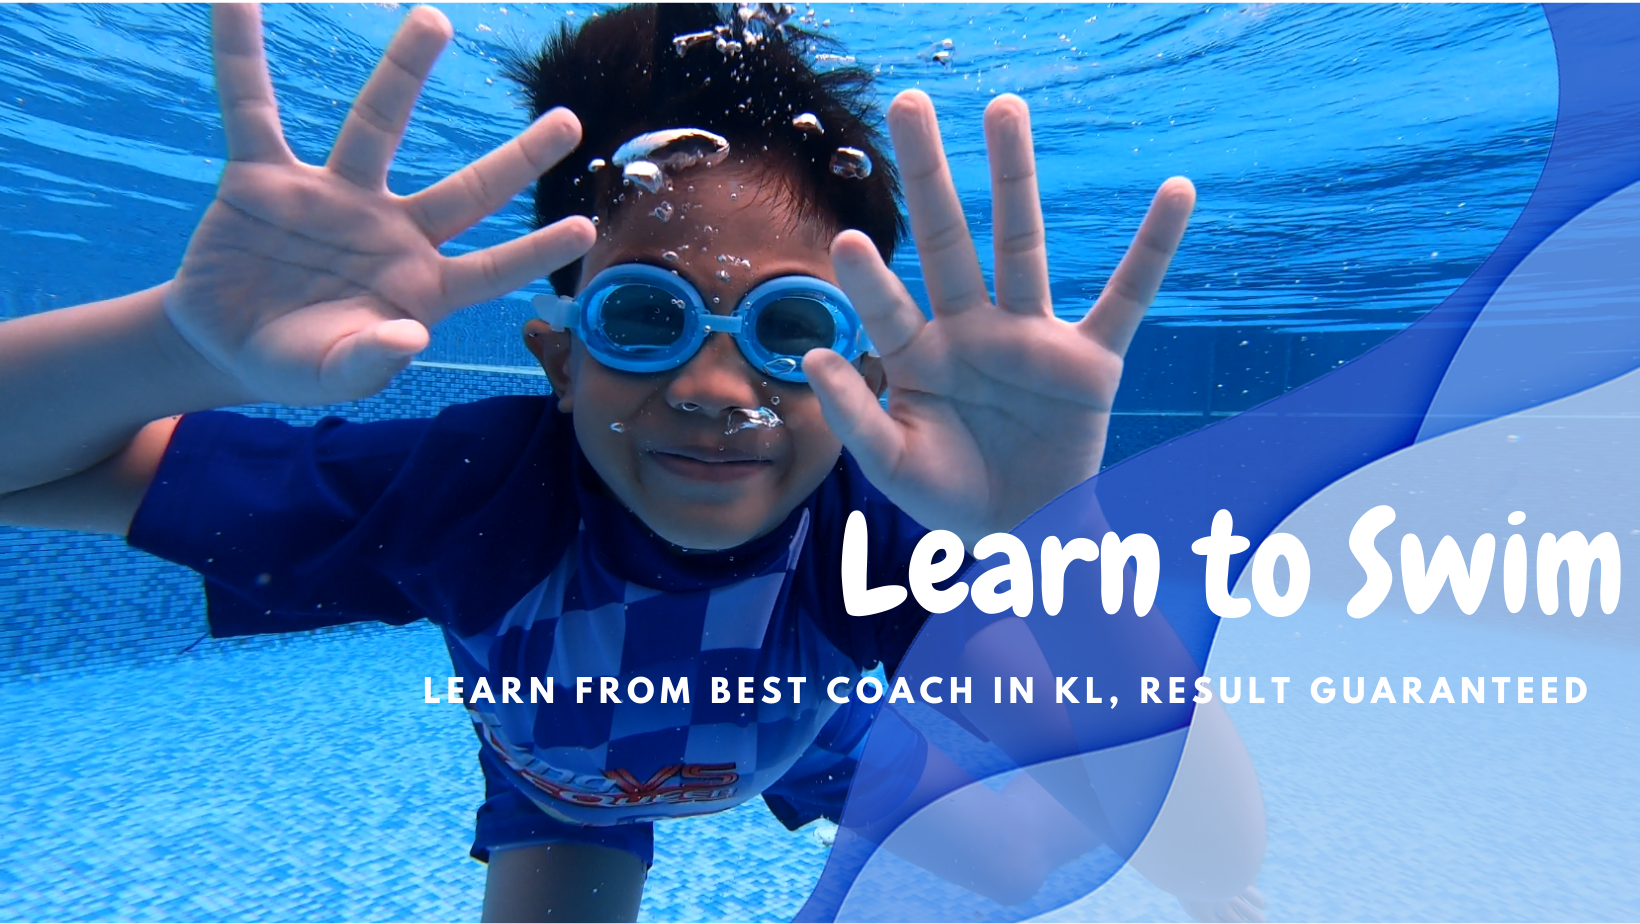 Onsite Private Kid's Swimming Lesson at Petaling Jaya by Swim Up Academy